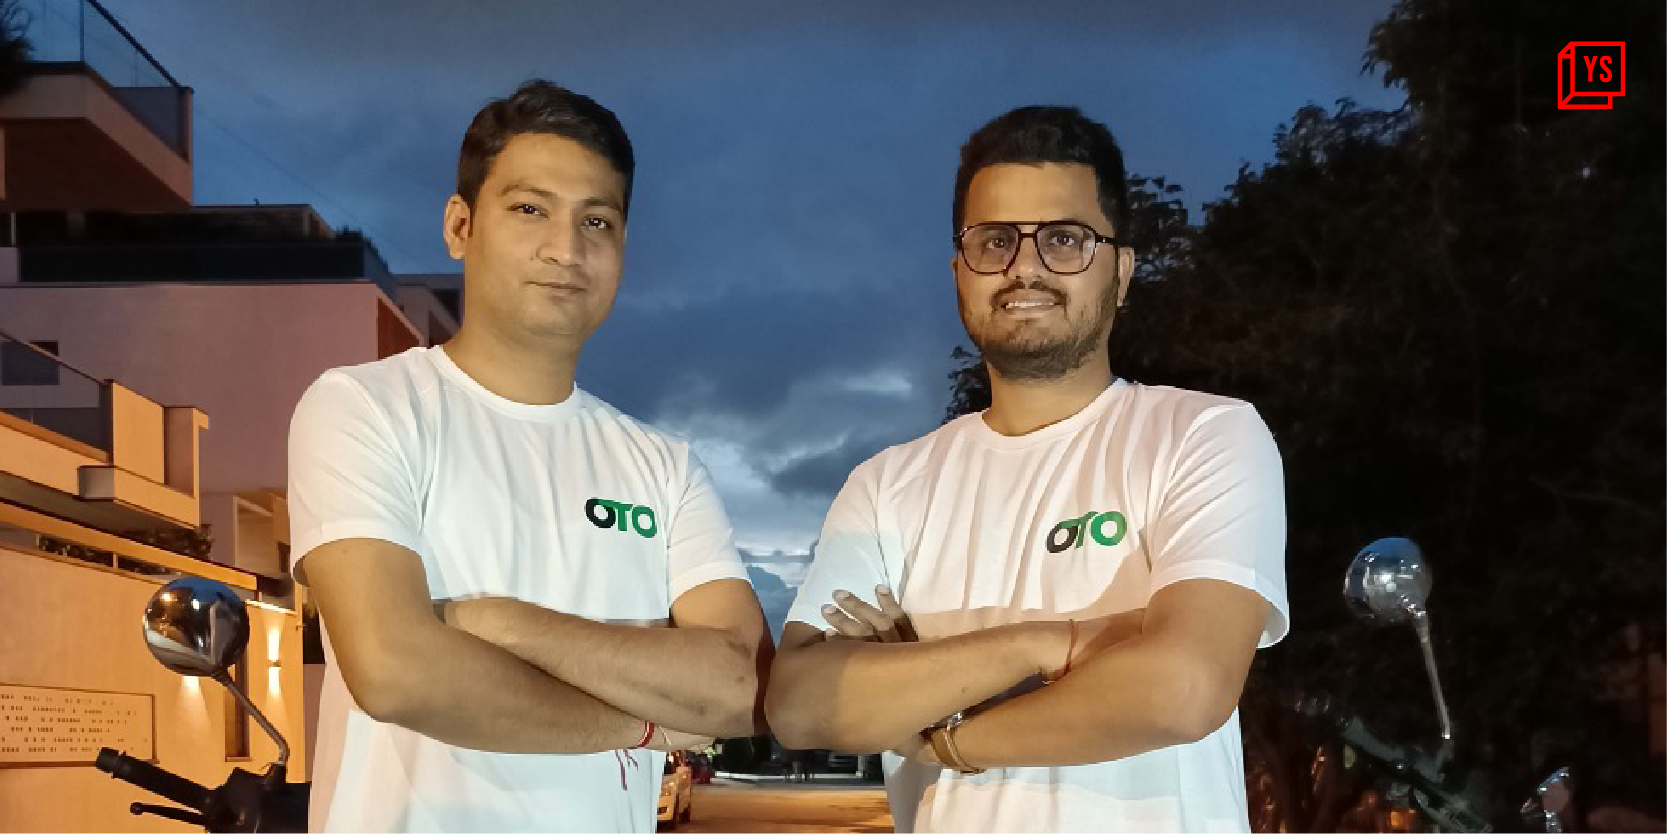 Meet OTO, a digital commerce platform for simplified two-wheeler buying and financing